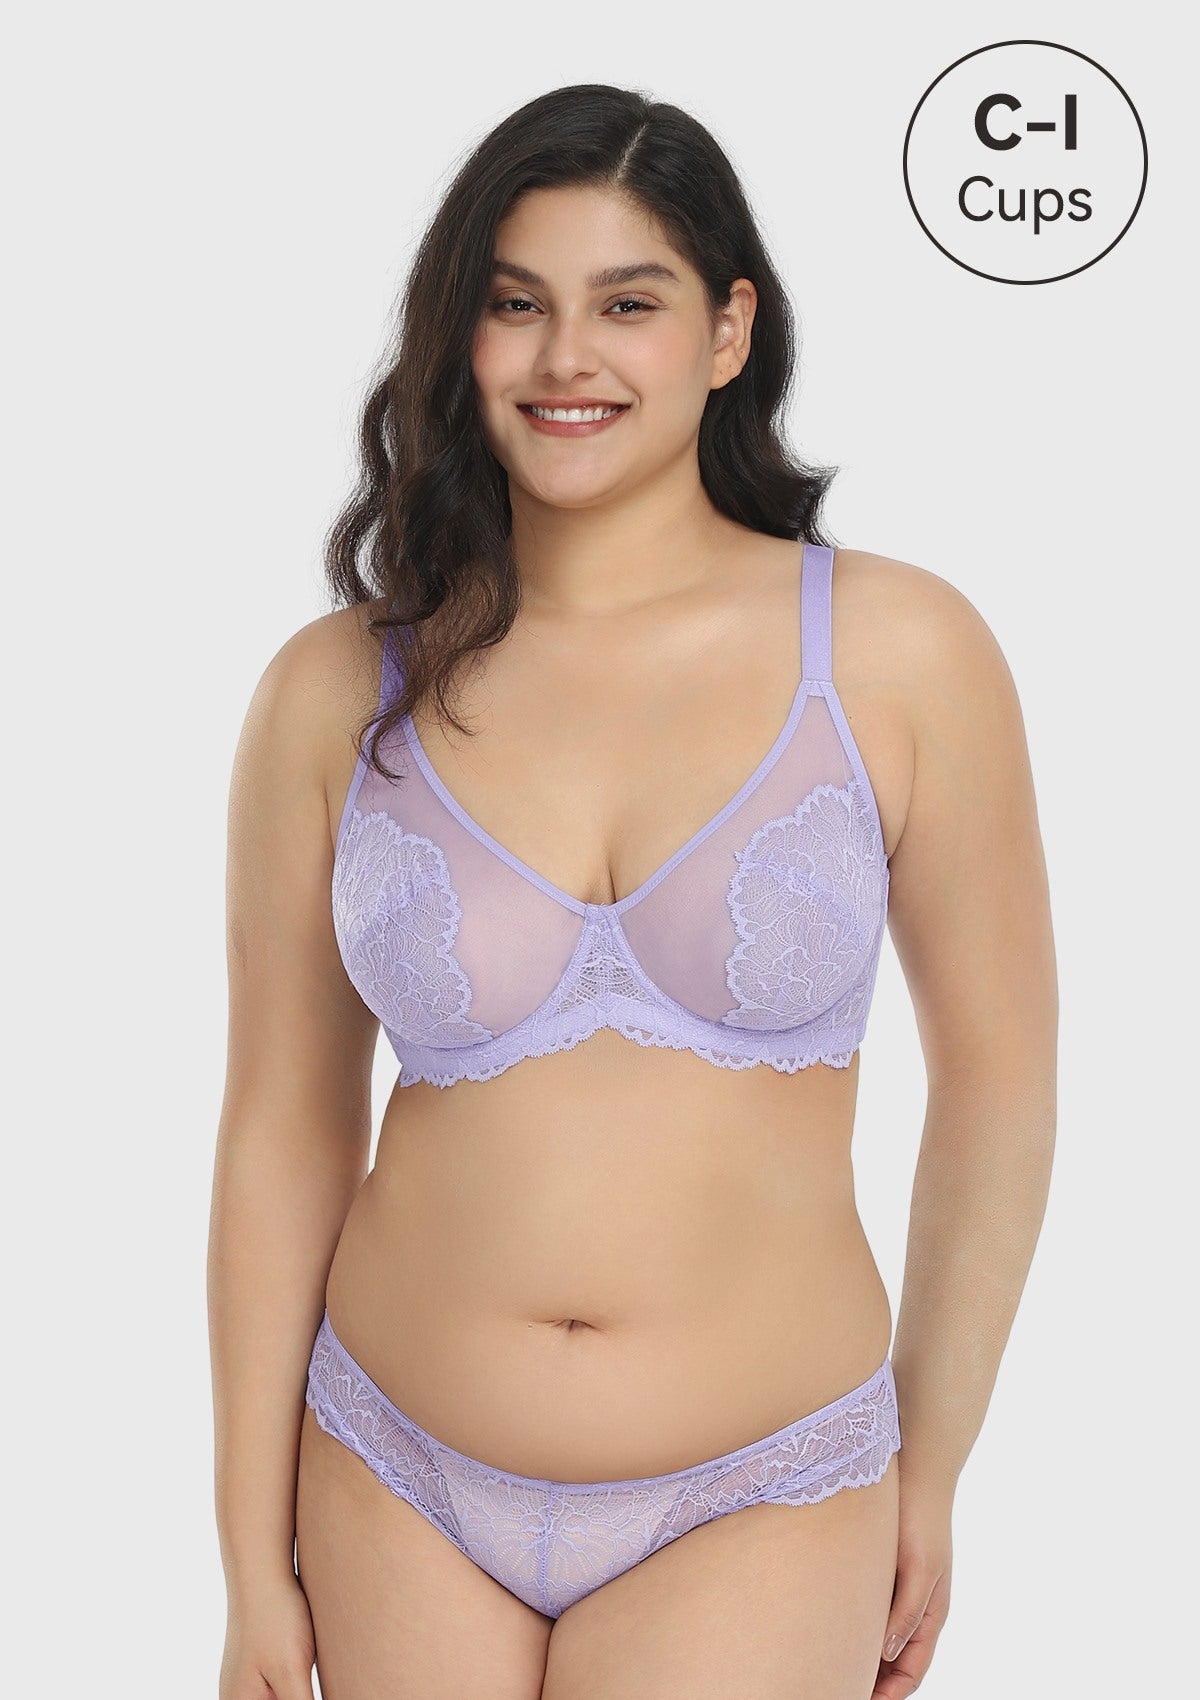 HSIA Blossom Transparent Lace Bra: Plus Size Wired Back Smoothing Bra - Light Purple / 40 / H